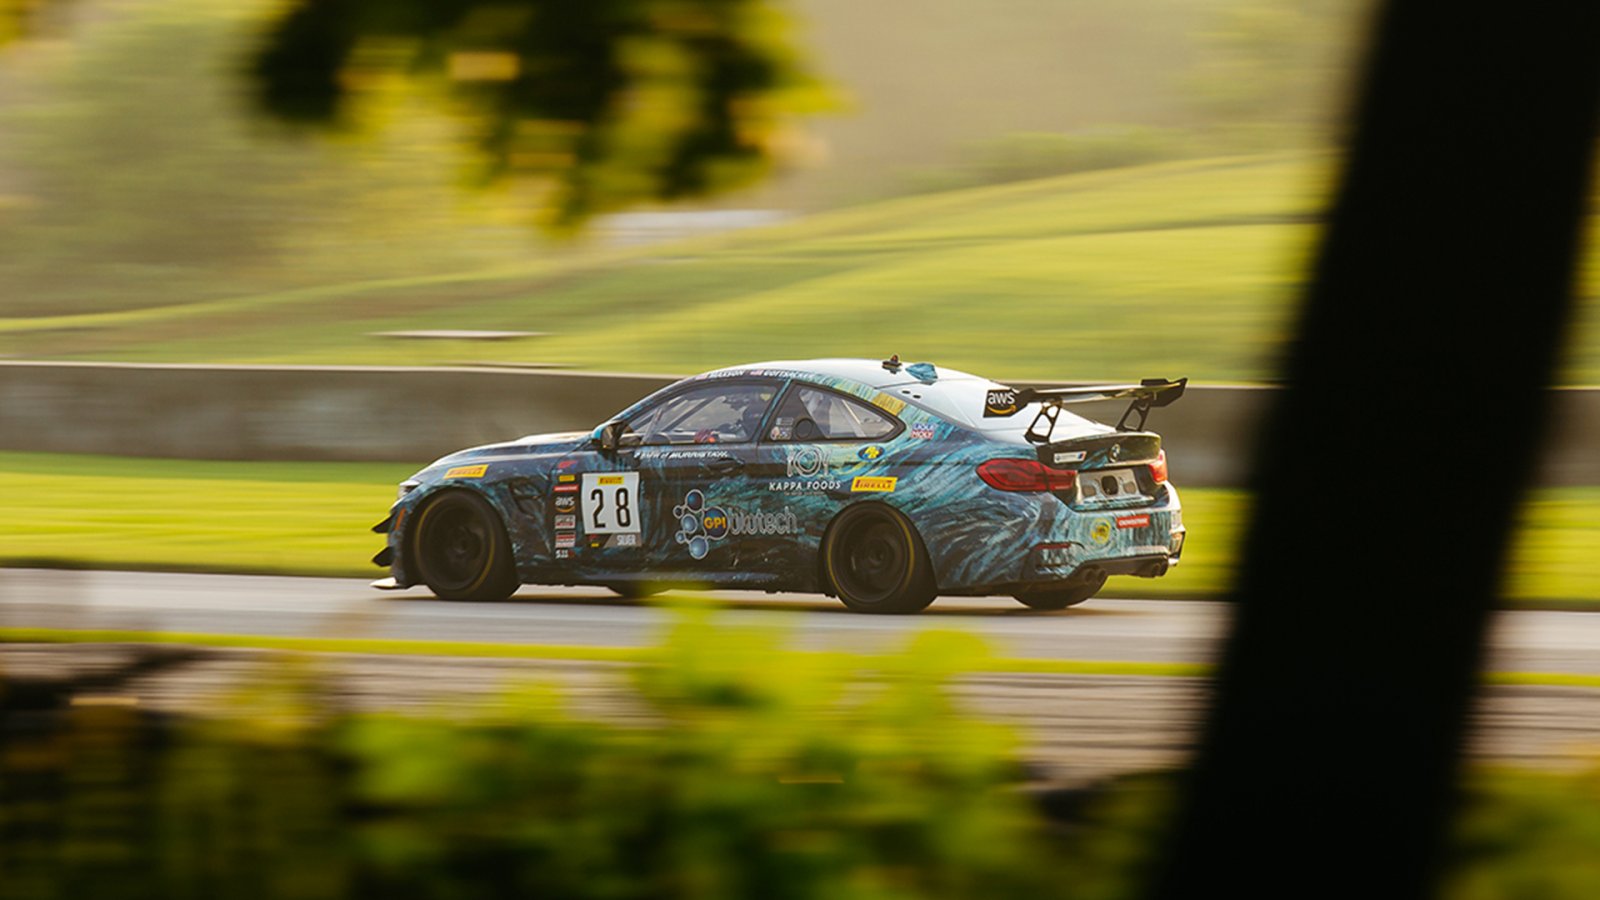 Tyler Maxson Wins with Harry Gottsacker and ST Racing in Pirelli GT4 America